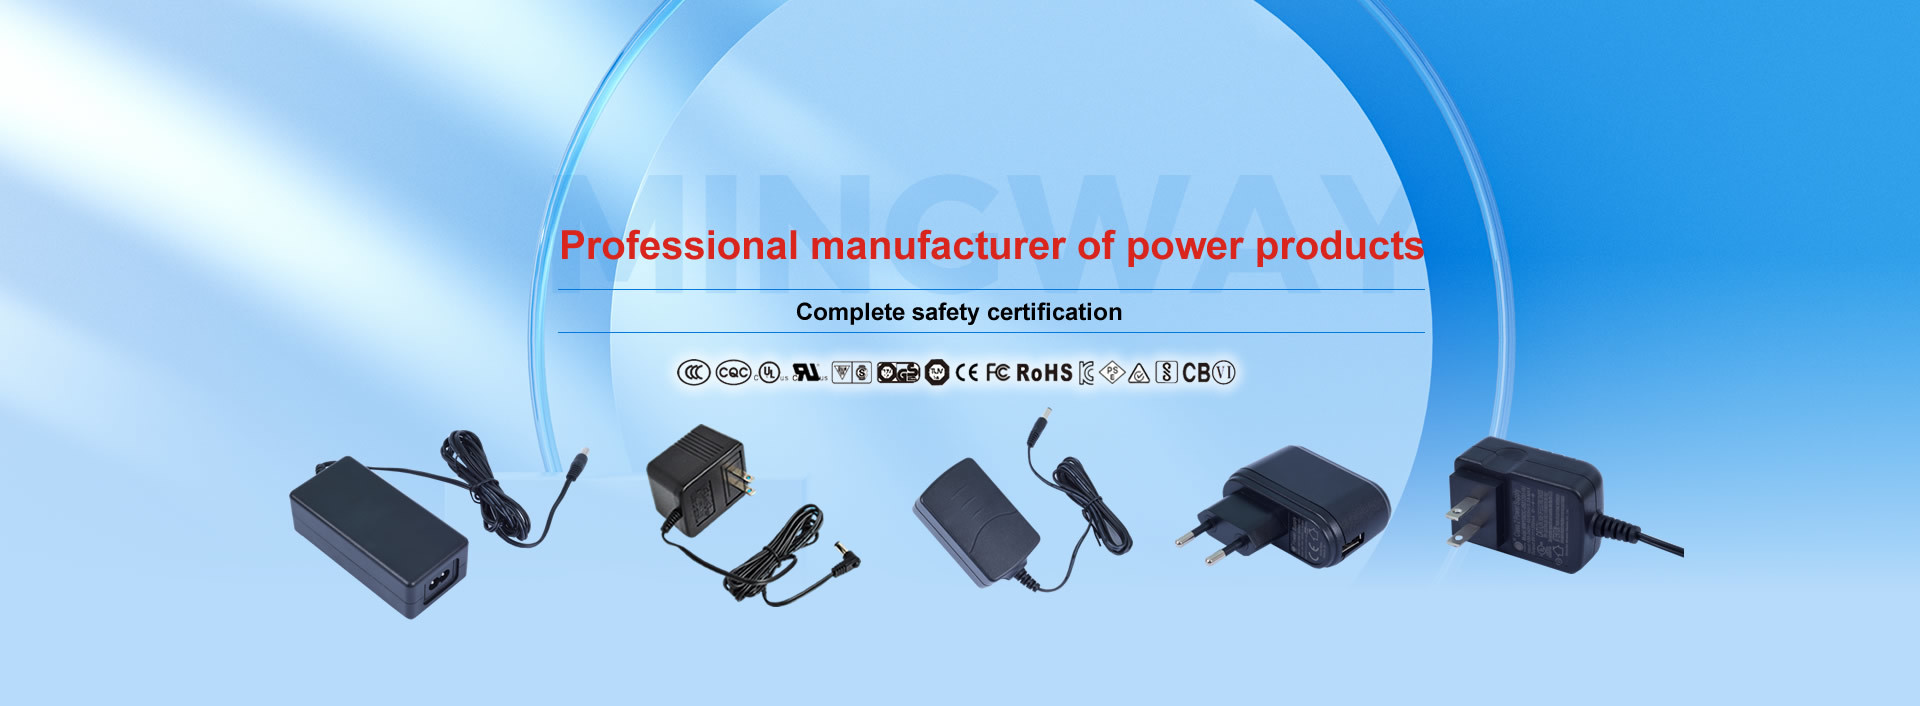 Professional manufacturer of power products